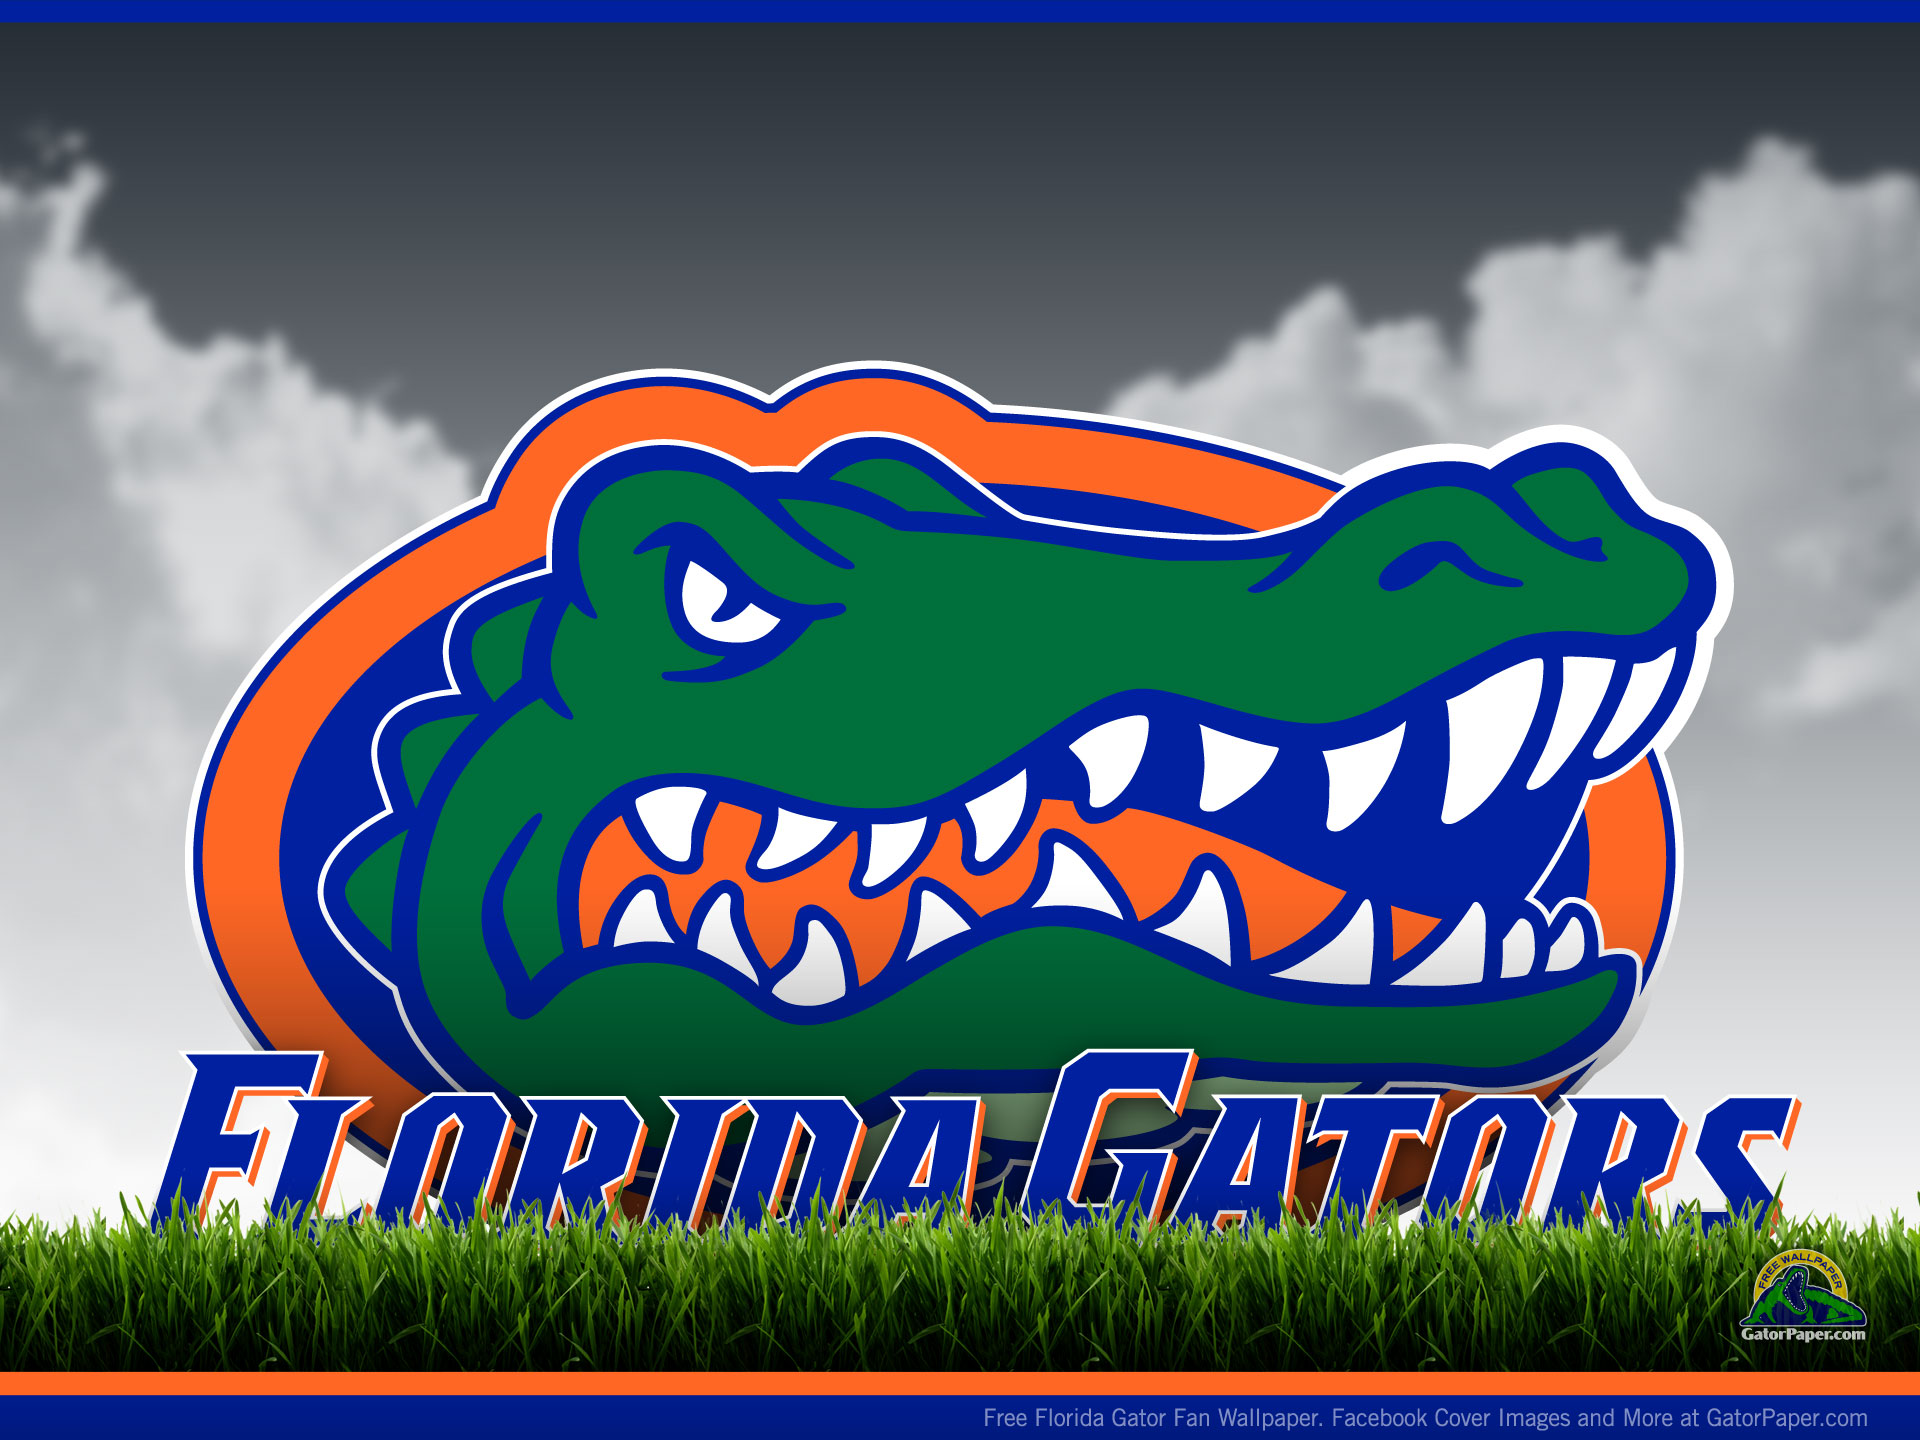 Related Pictures Gators Football Team On Their National Championship